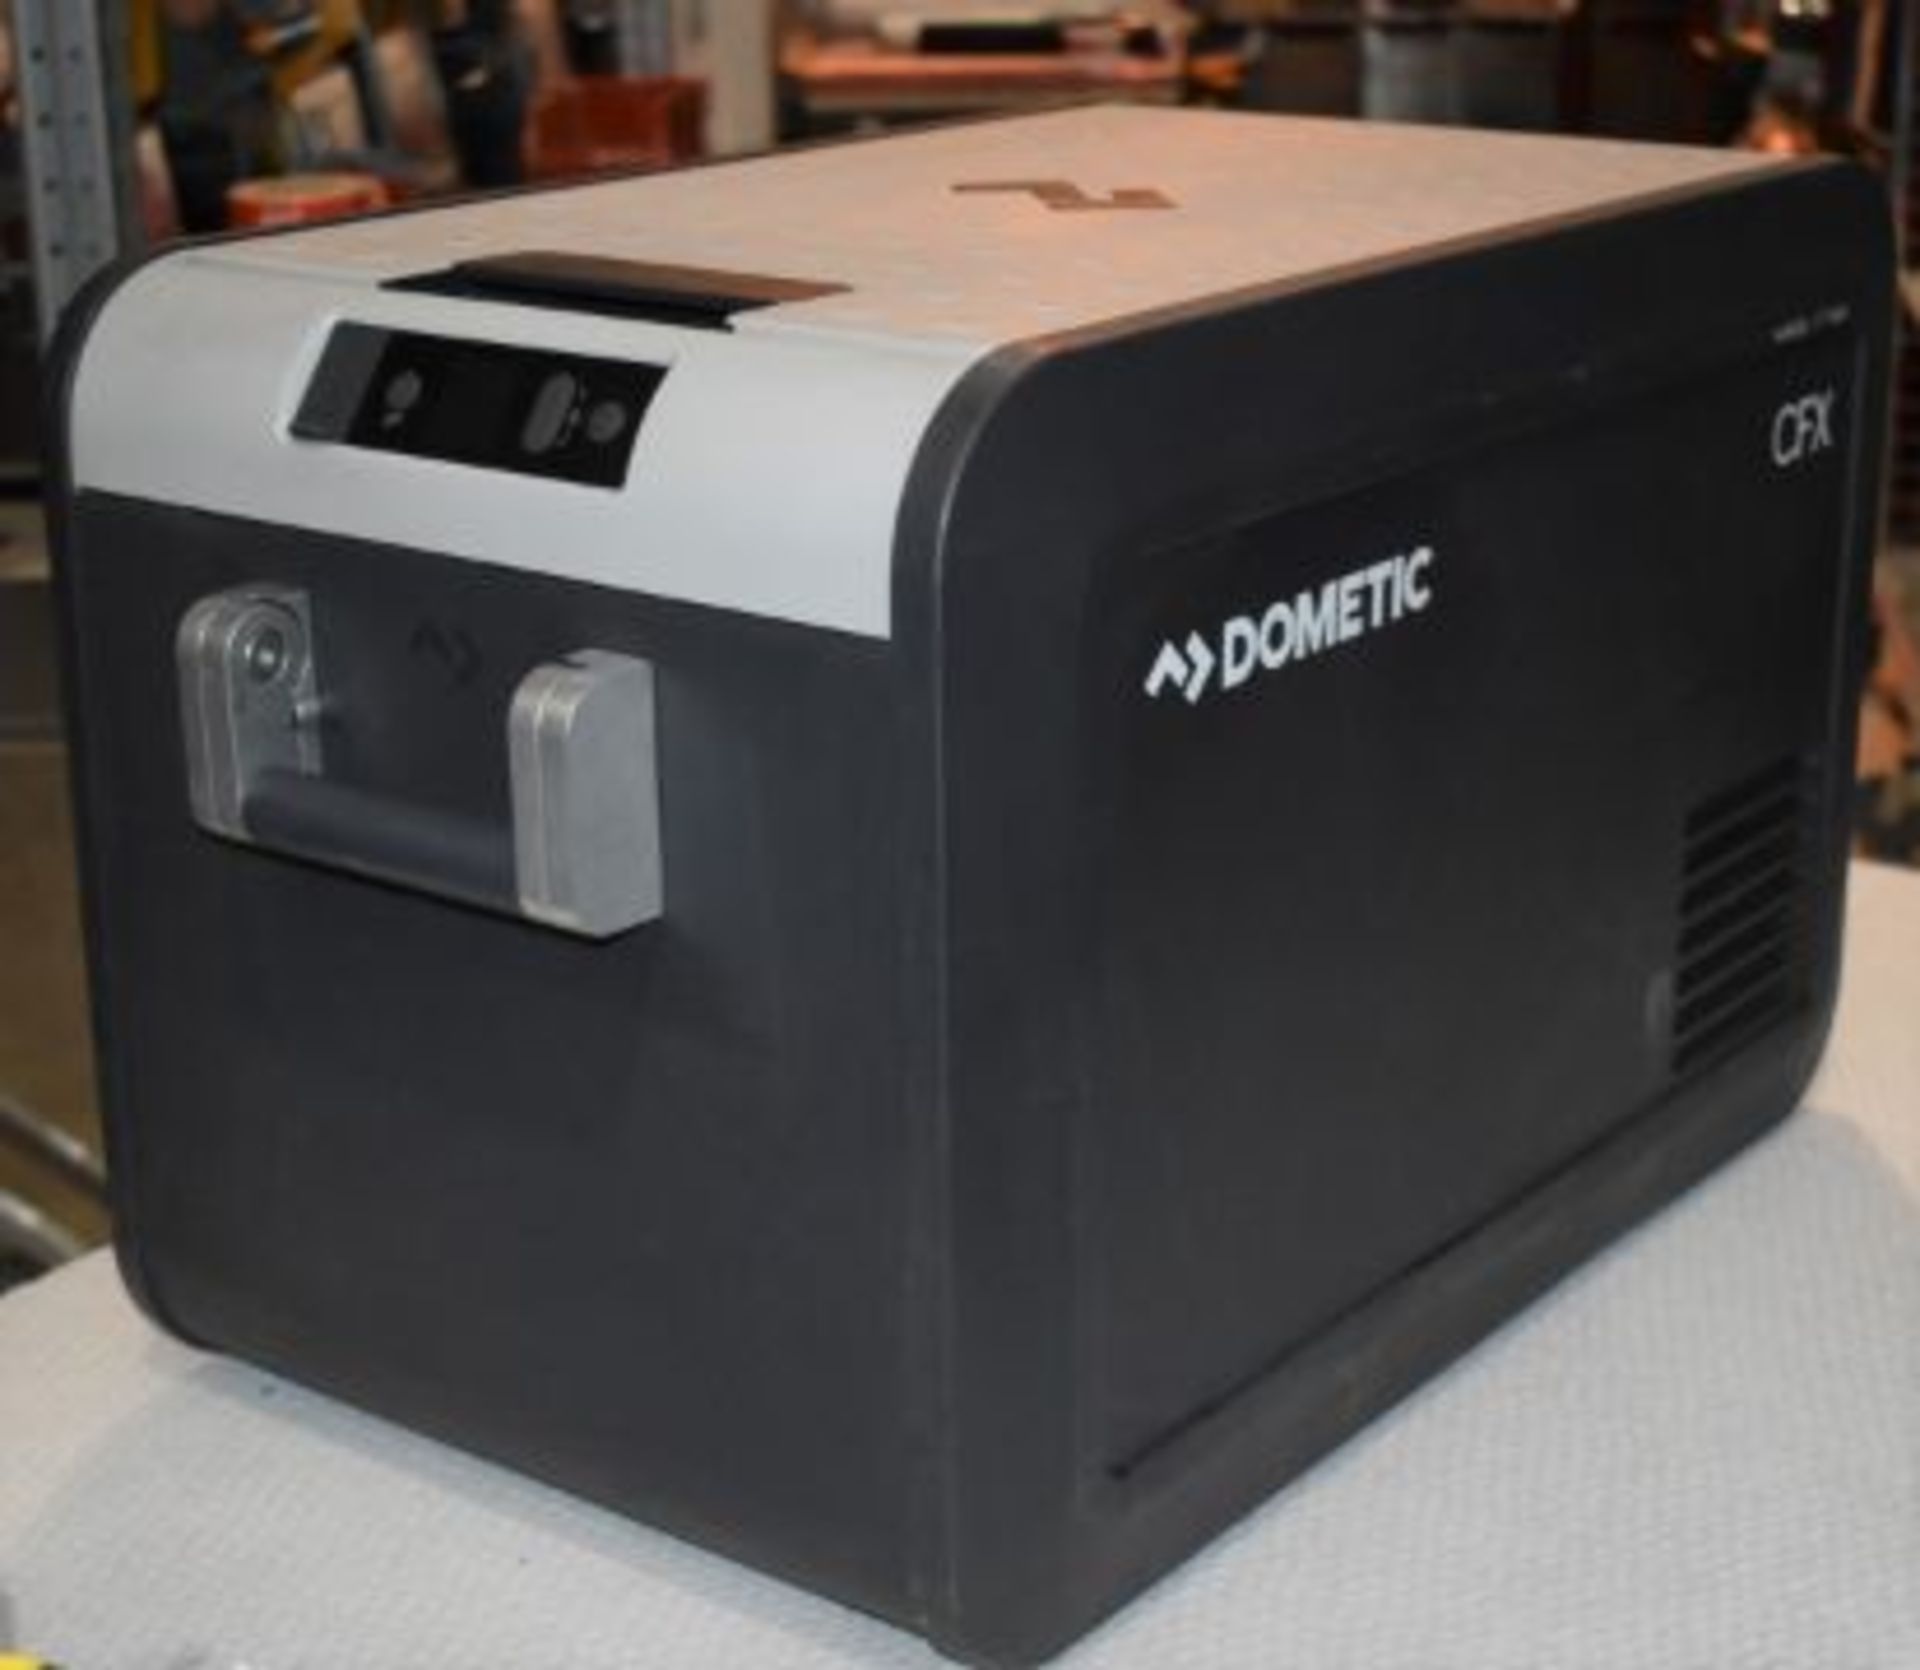 1 x Dometic CFX3 35 Portable Compressor Cooler / Freezer - For Camping, Motorhomes, Parties RRP £916 - Image 3 of 9